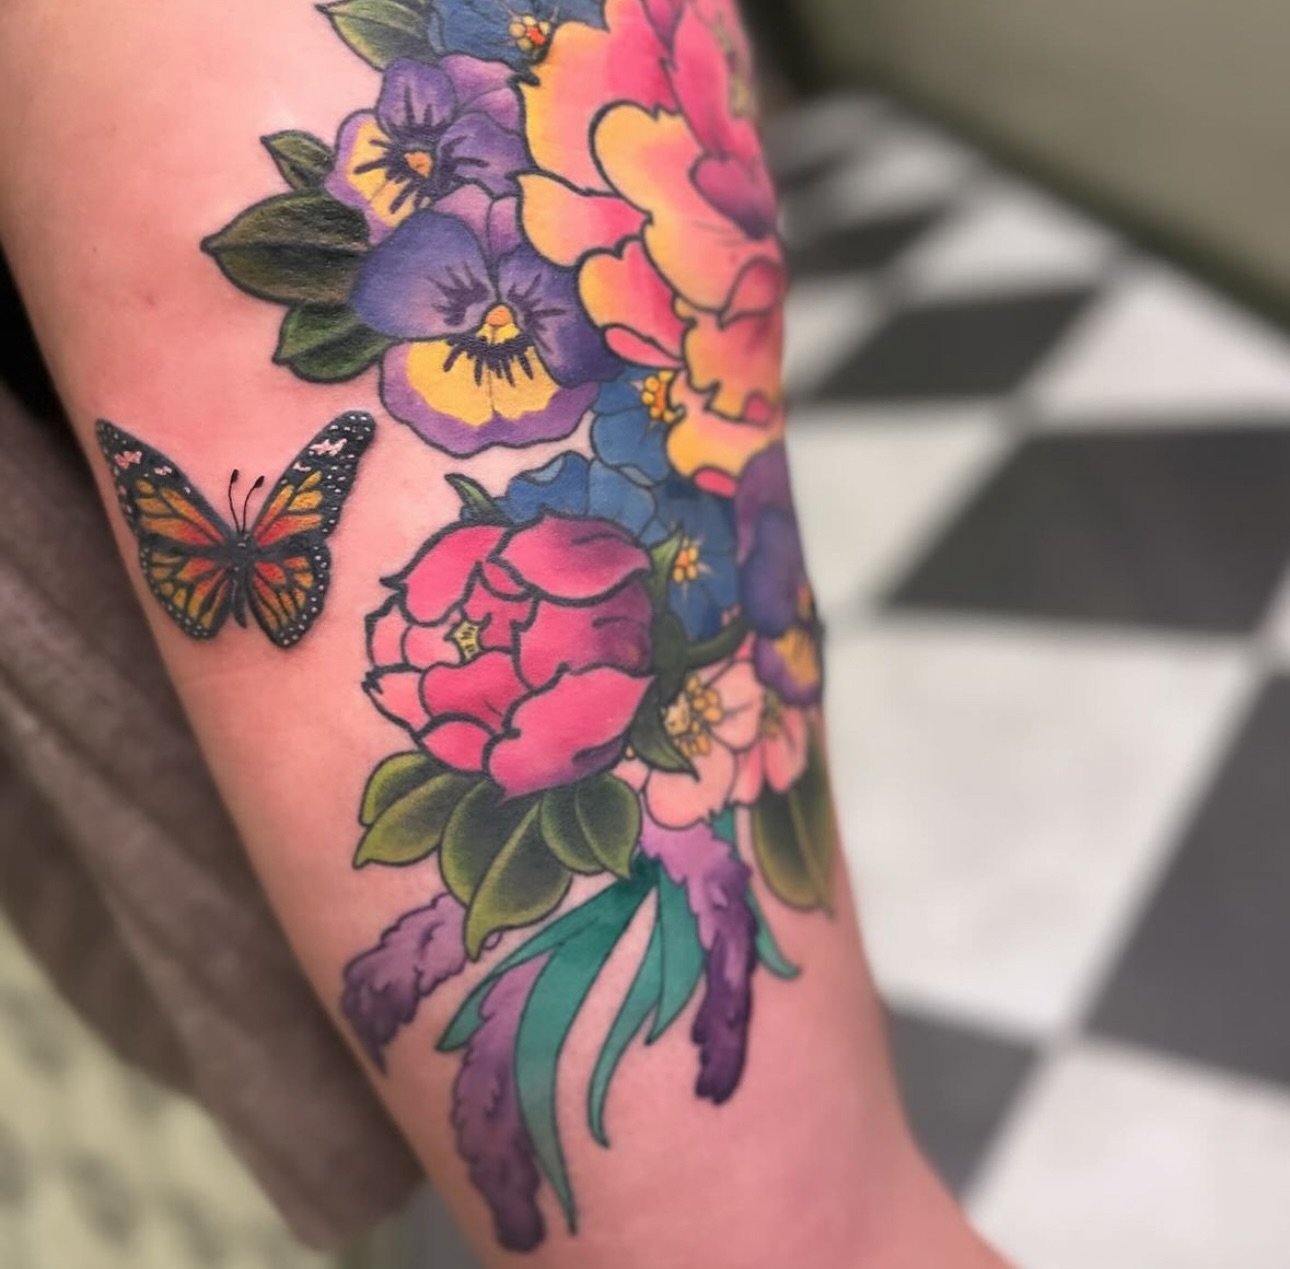 Sneak peek by Ingrid For bookings: DM Lets Buzz! or contact her directly at ingrid.letsbuzz@gmail.com  #letsbuzz #letsbuzzbergen #letsbuzztattoo #bergen #bergennorway #tattoobergen  #norwegiantattooers #tattoo #tattooinspiration  #wip #floraltattoo